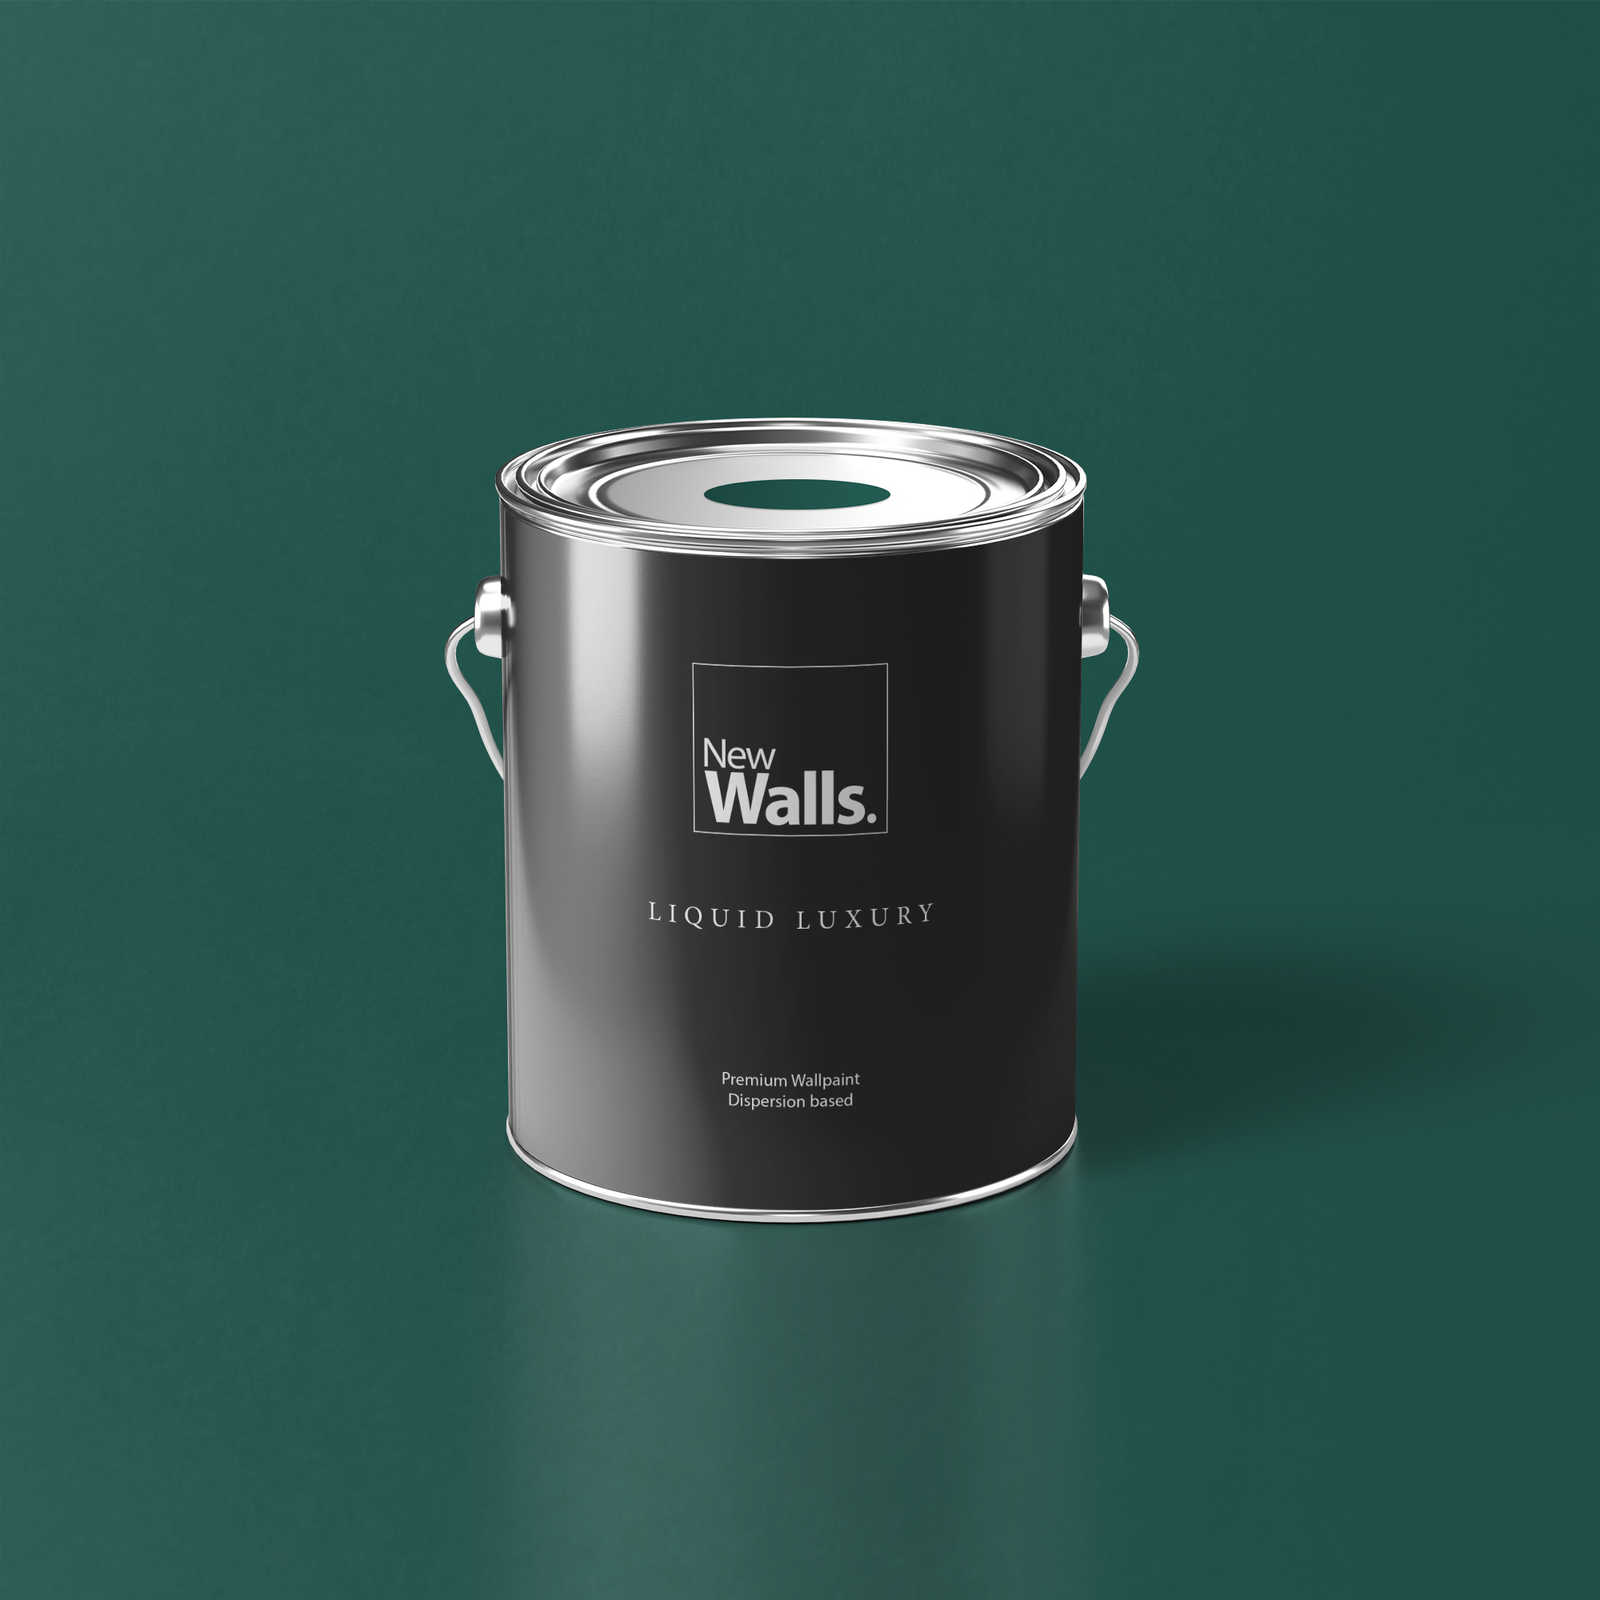 Premium Wall Paint gorgeous emerald green »Expressive Emerald« NW412 – 5 litre
